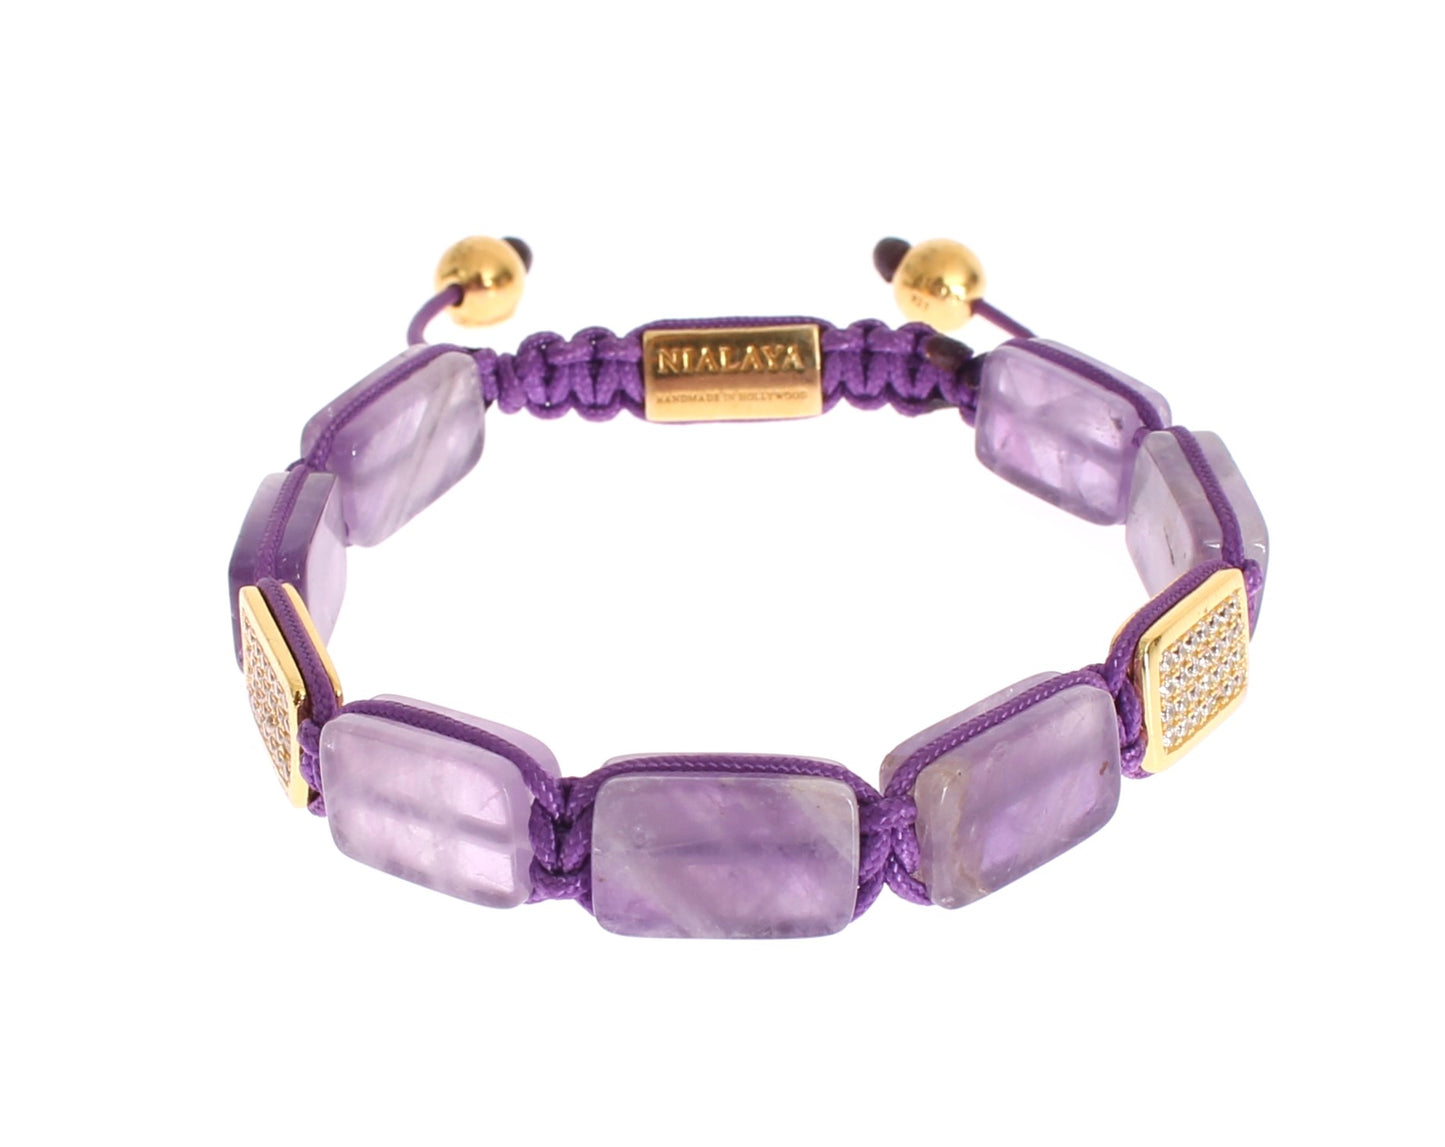 CZ Amethyst 18K Gold 925 Bracelet - Designed by Nialaya Available to Buy at a Discounted Price on Moon Behind The Hill Online Designer Discount Store